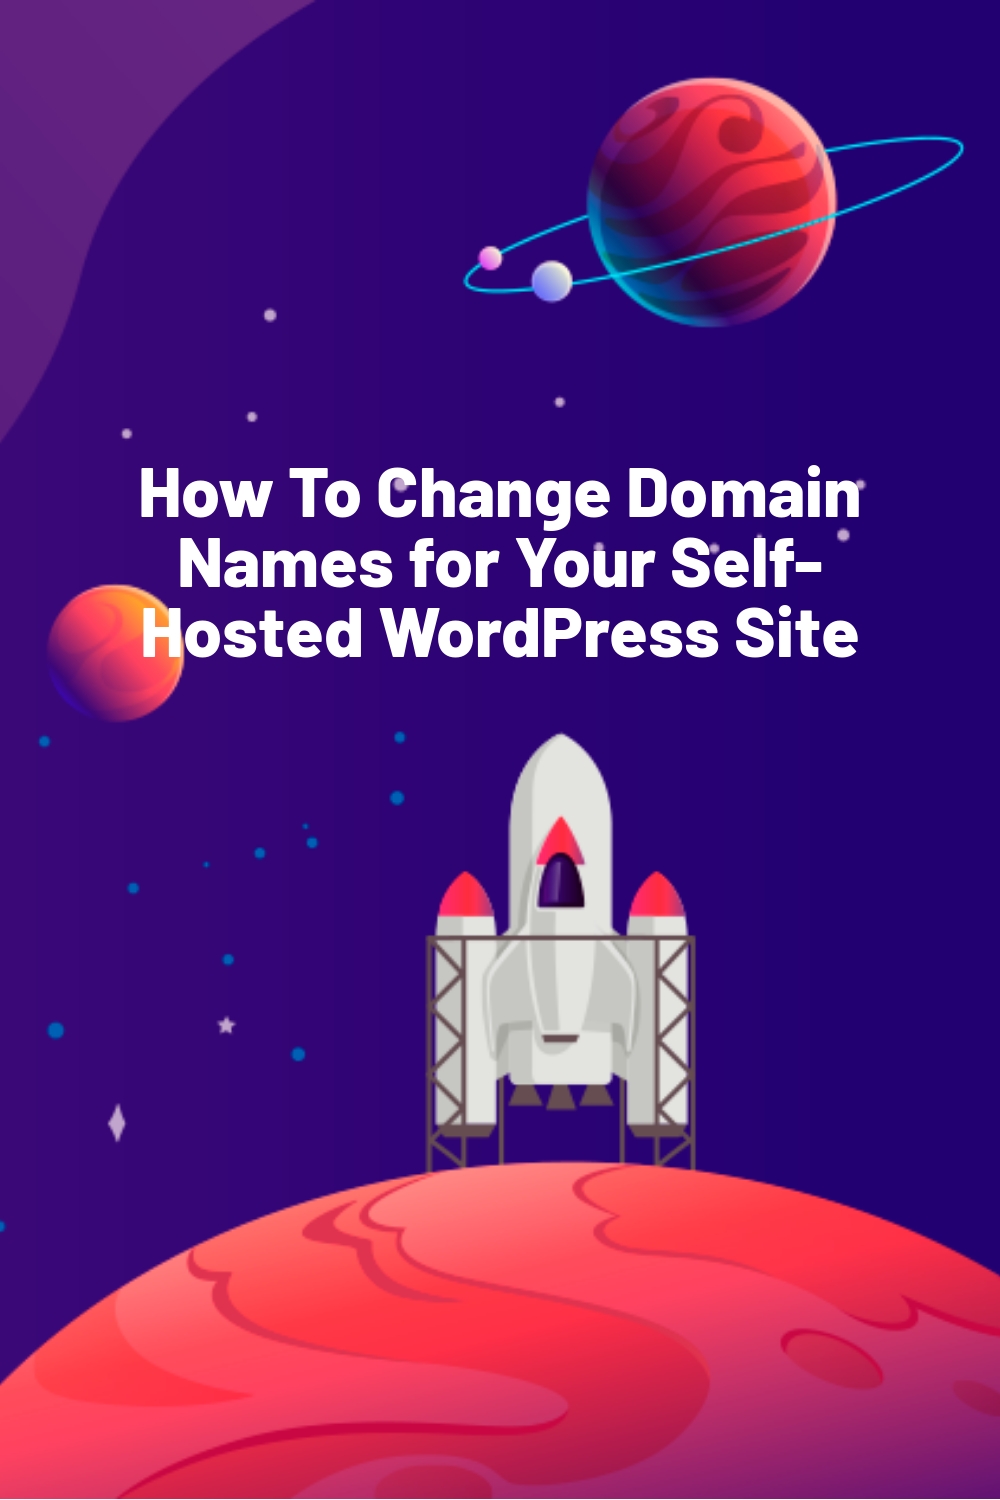 How To Change Domain Names for Your Self-Hosted WordPress Site